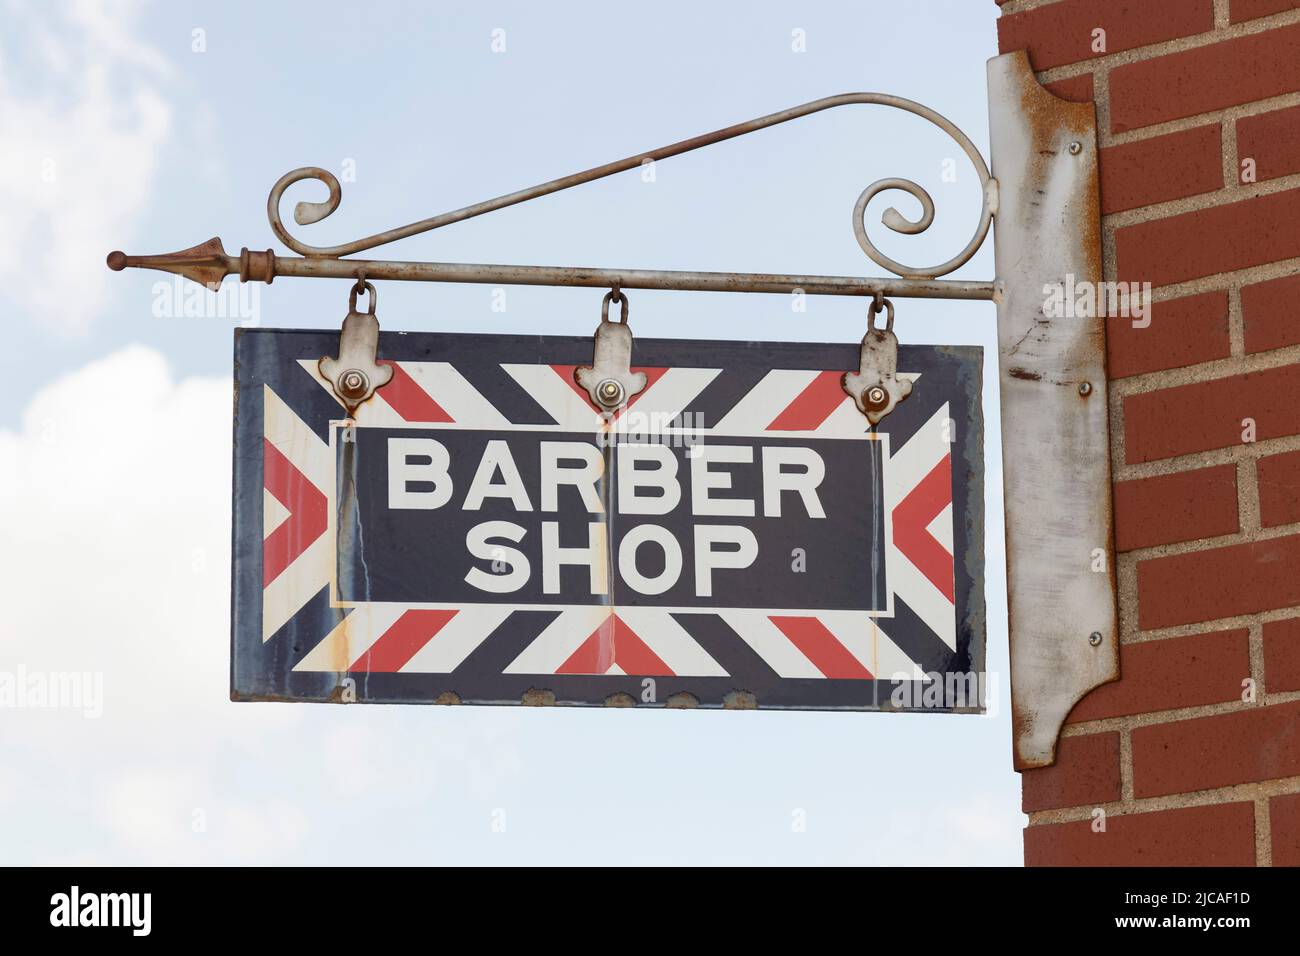 Barber Shop sign. Old-fashioned red and blue striped Barber Shop sign. Stock Photo